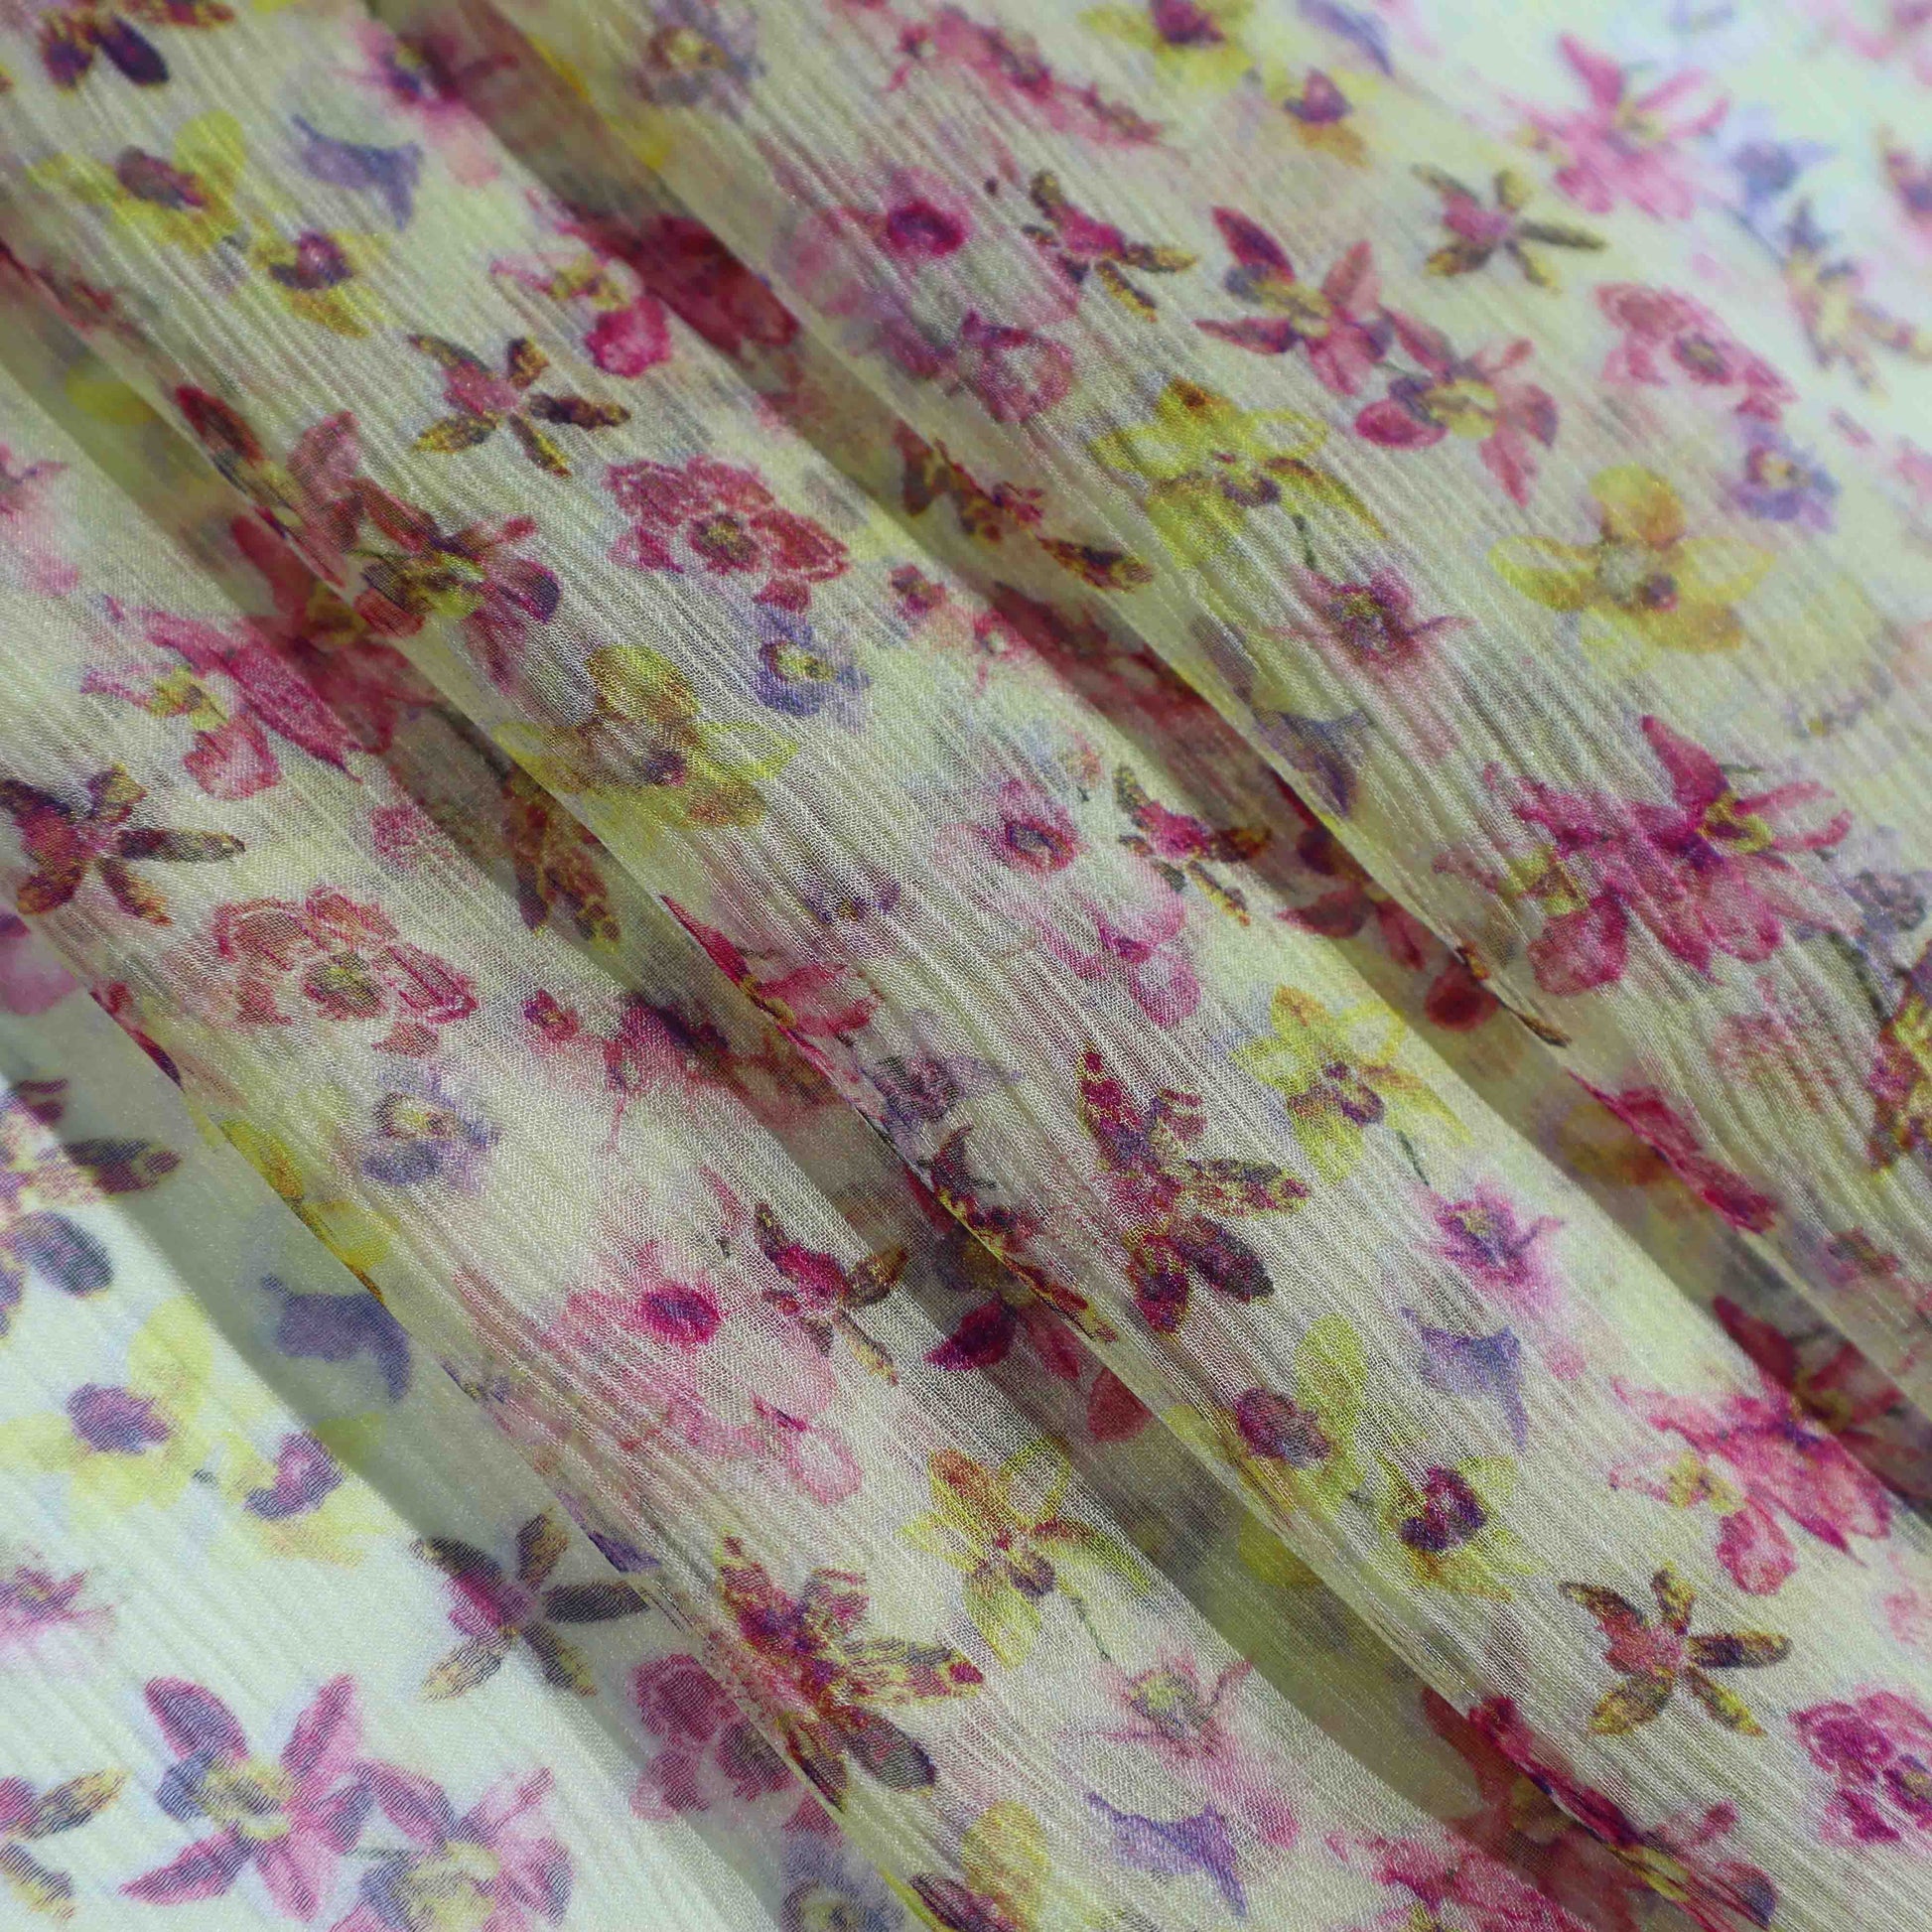 An European-made super lightweight silk chiffon with vintage Floral de minute prints. This fabric has a dry, smooth hand feel yet softens considerably after washing.